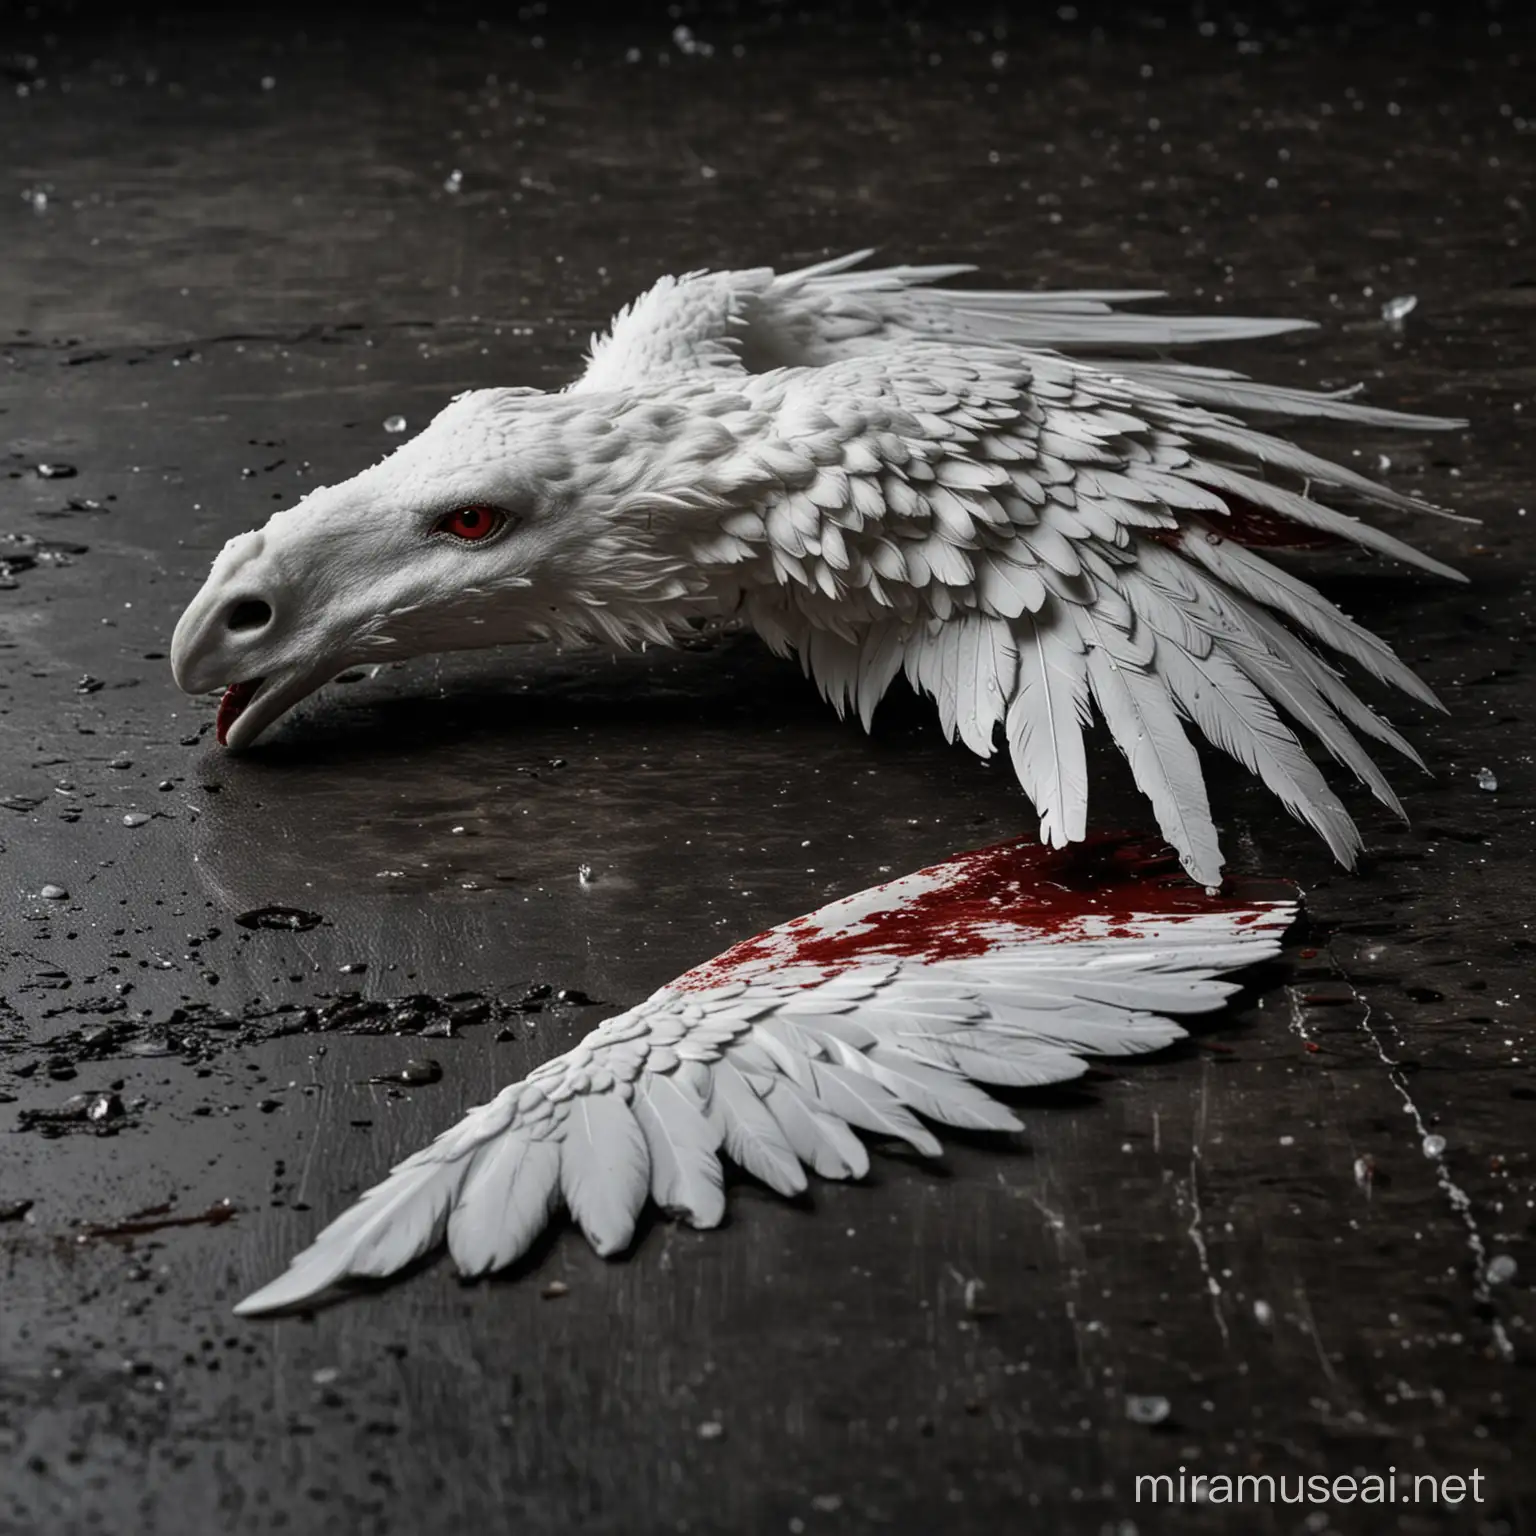 the white head and the Wing of pegasus lying in the floor in a dark and dramatic environment, in close up and a 
side view. Small drops of blood close to it's wing.